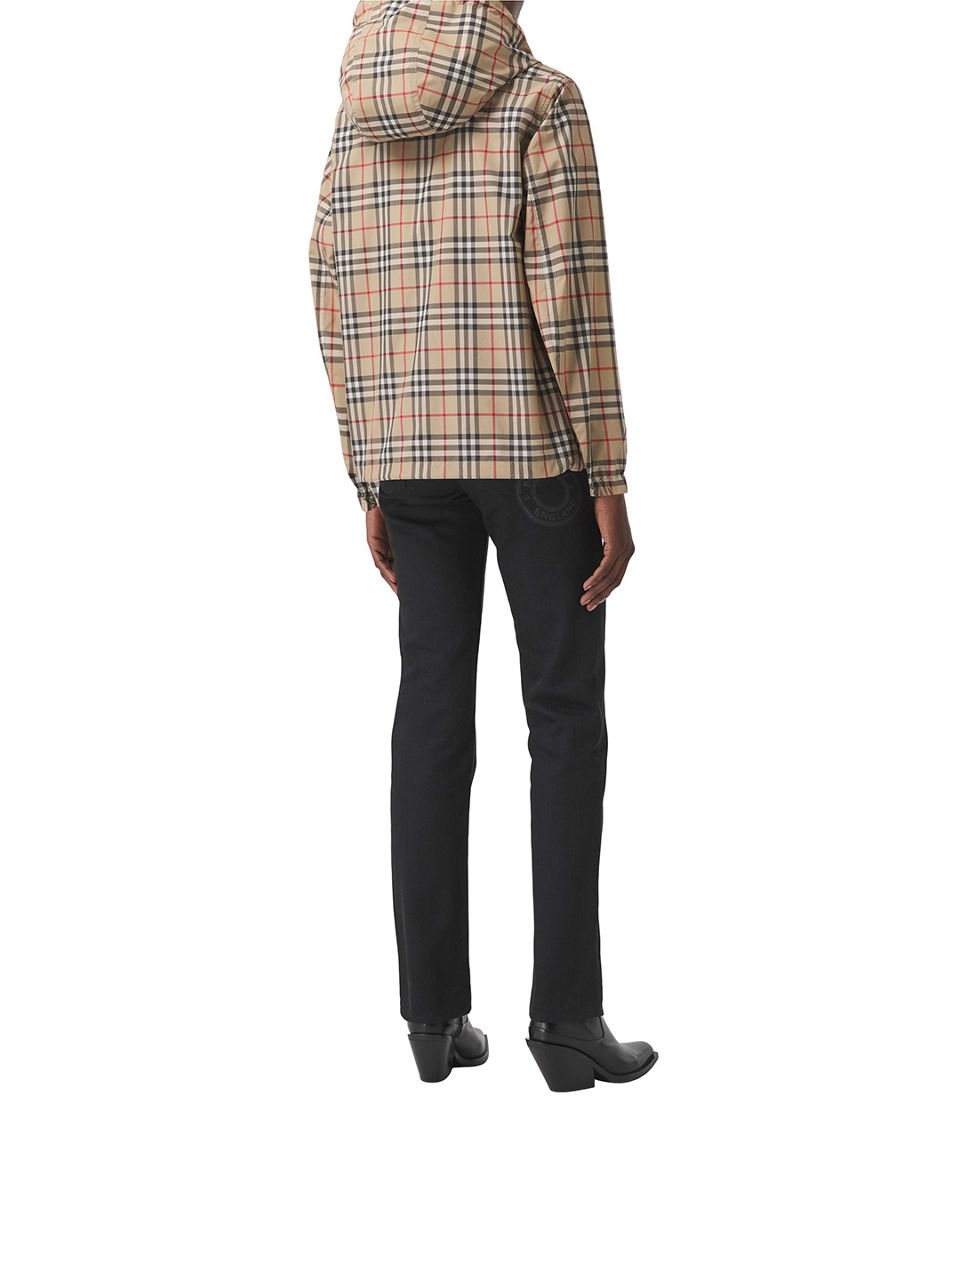 Burberry Vintage Check Hooded Jacket